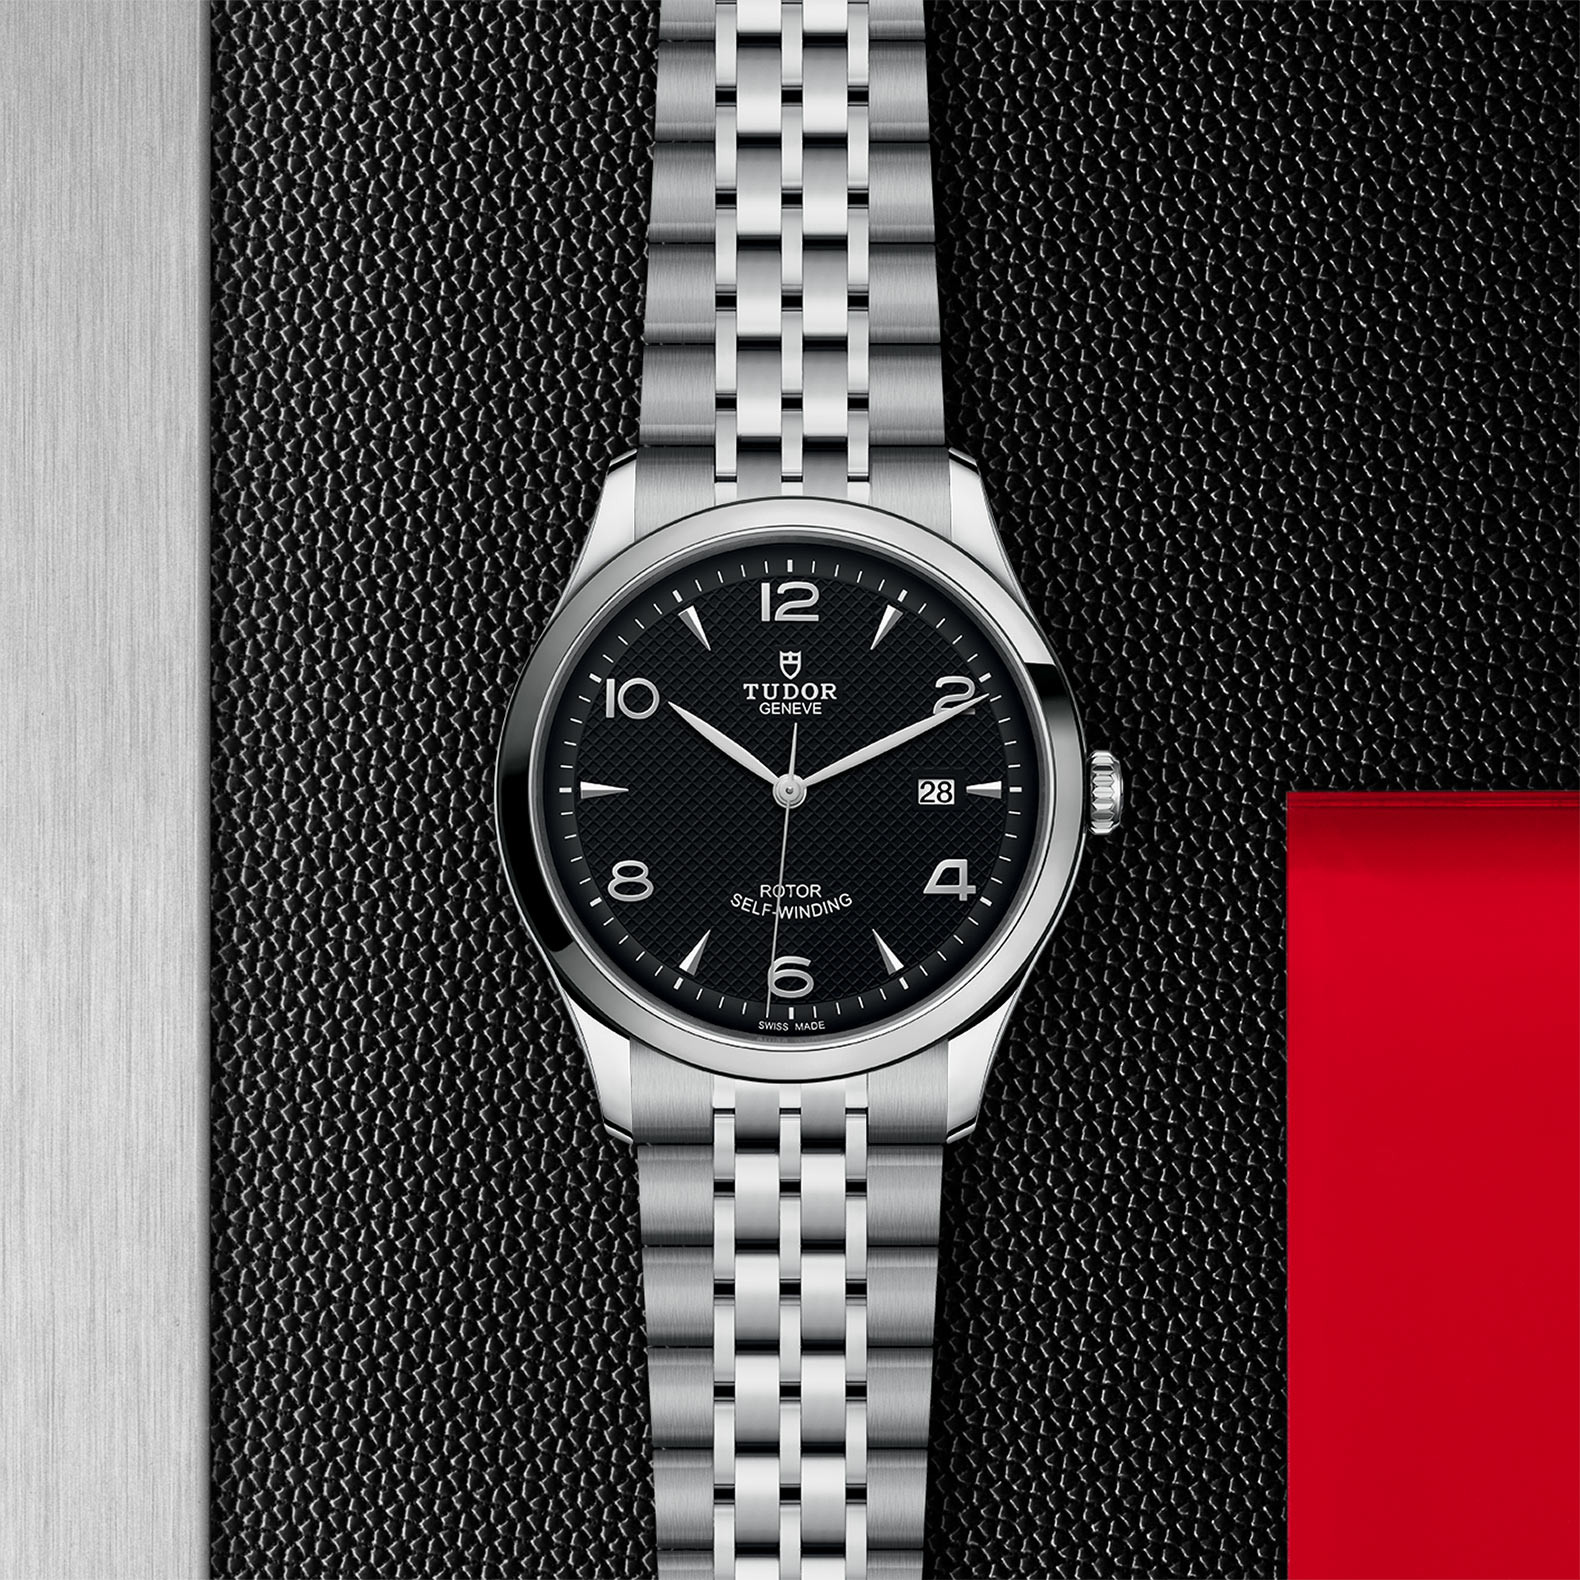 TUDOR 1926 Watch in Store Flat Lay